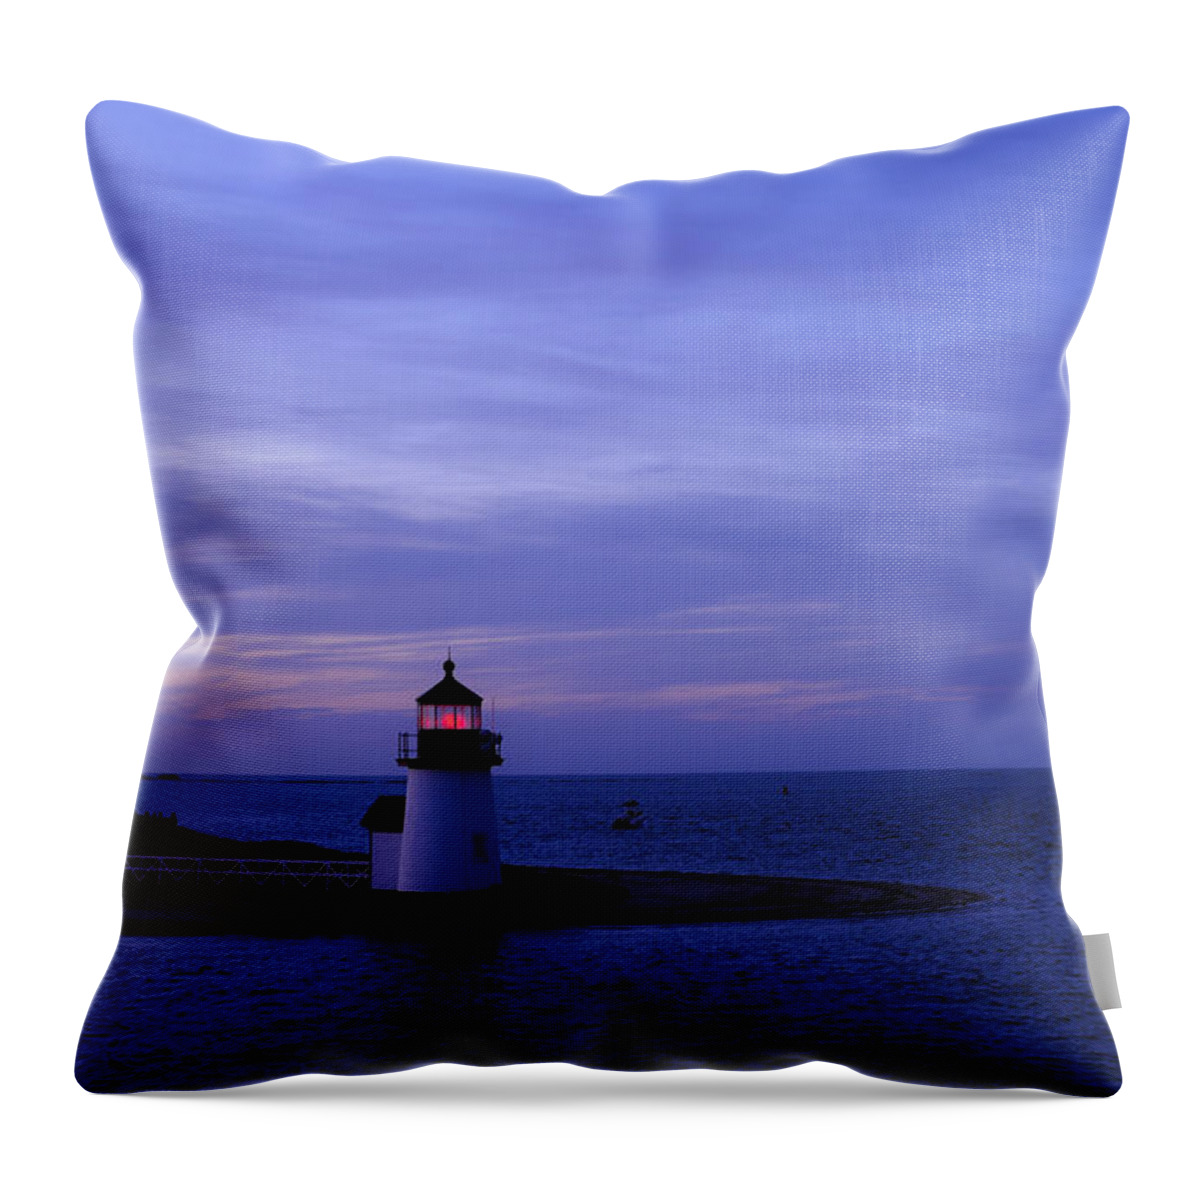 Cape Cod Throw Pillow featuring the photograph Brant Point Lighthouse at Night by Marianne Campolongo